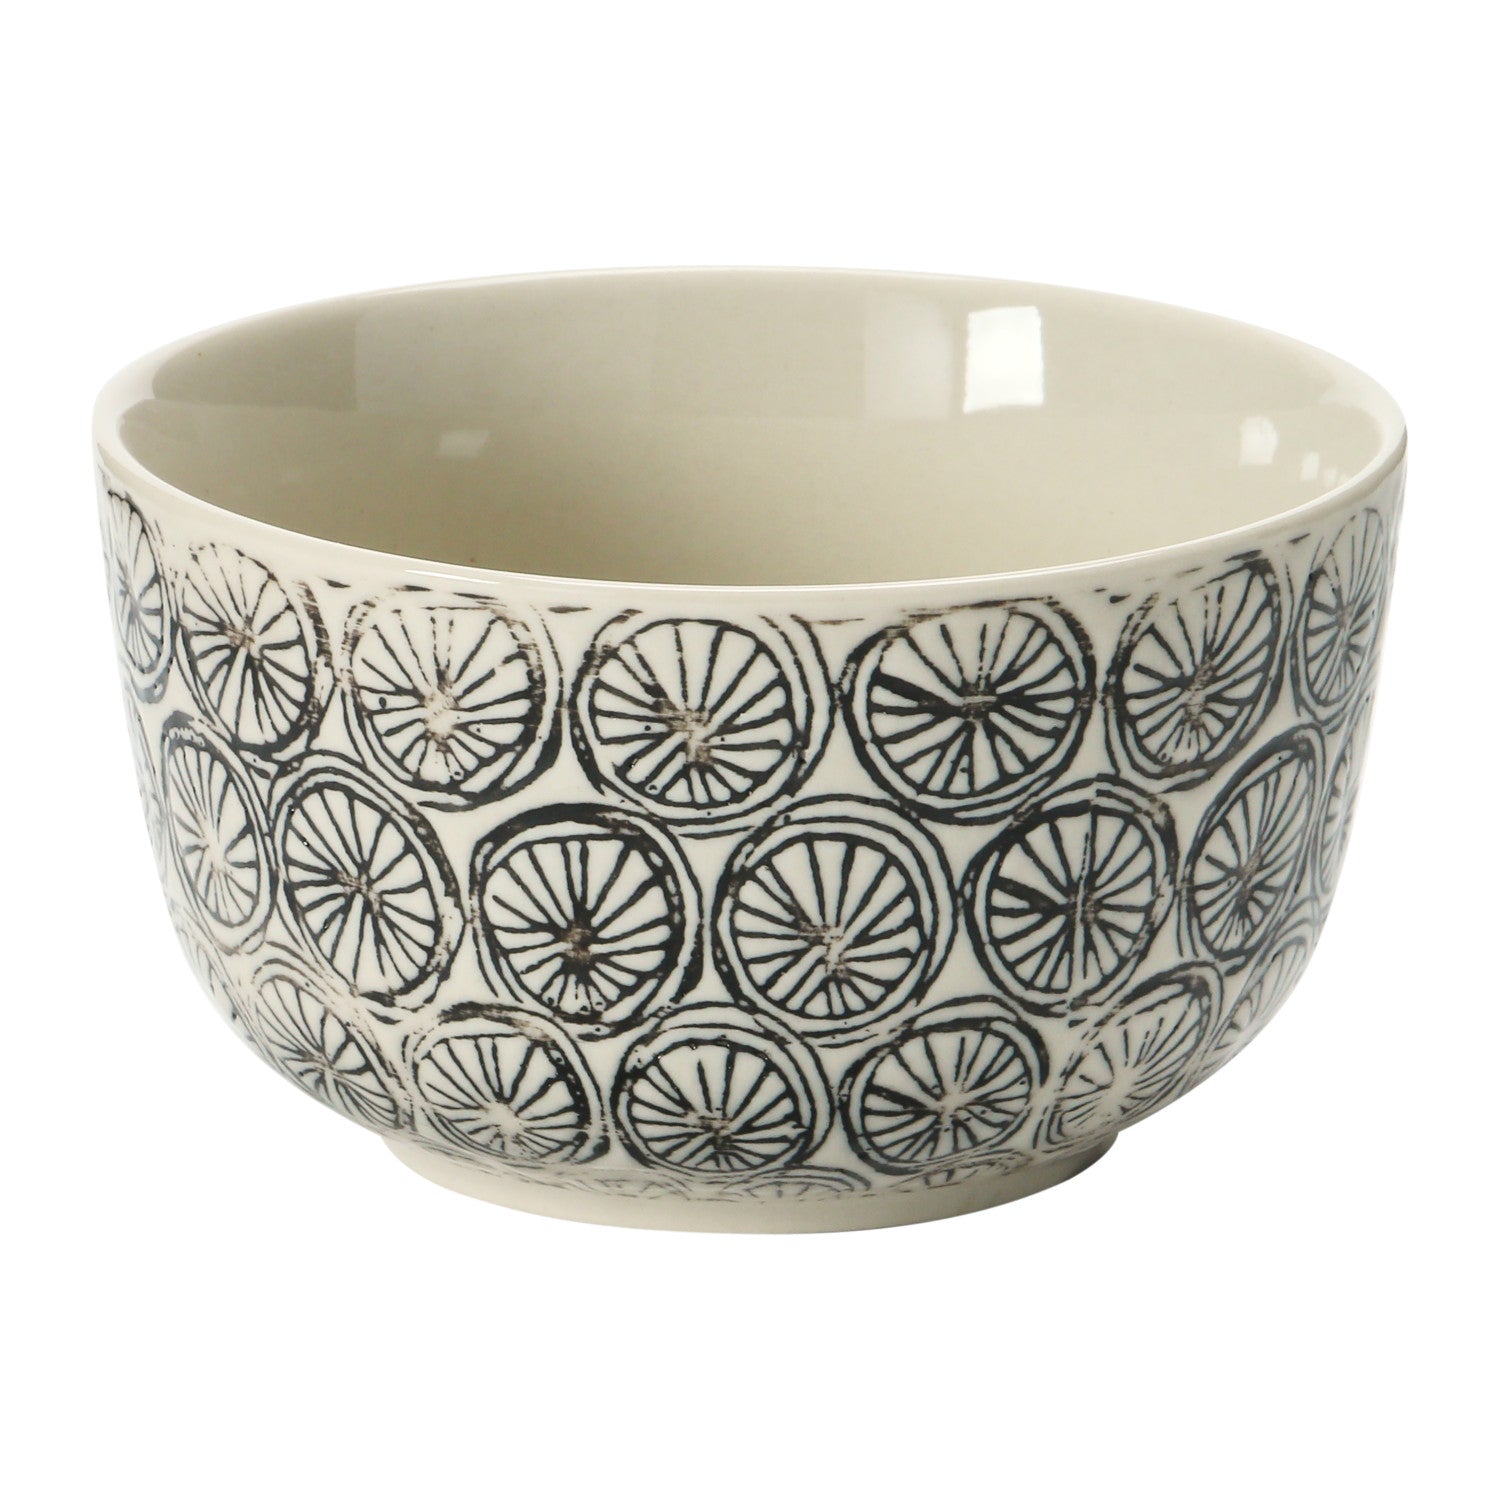 Stamped Stoneware Bowl w/ Embossed Pattern, Cream Color & Black,